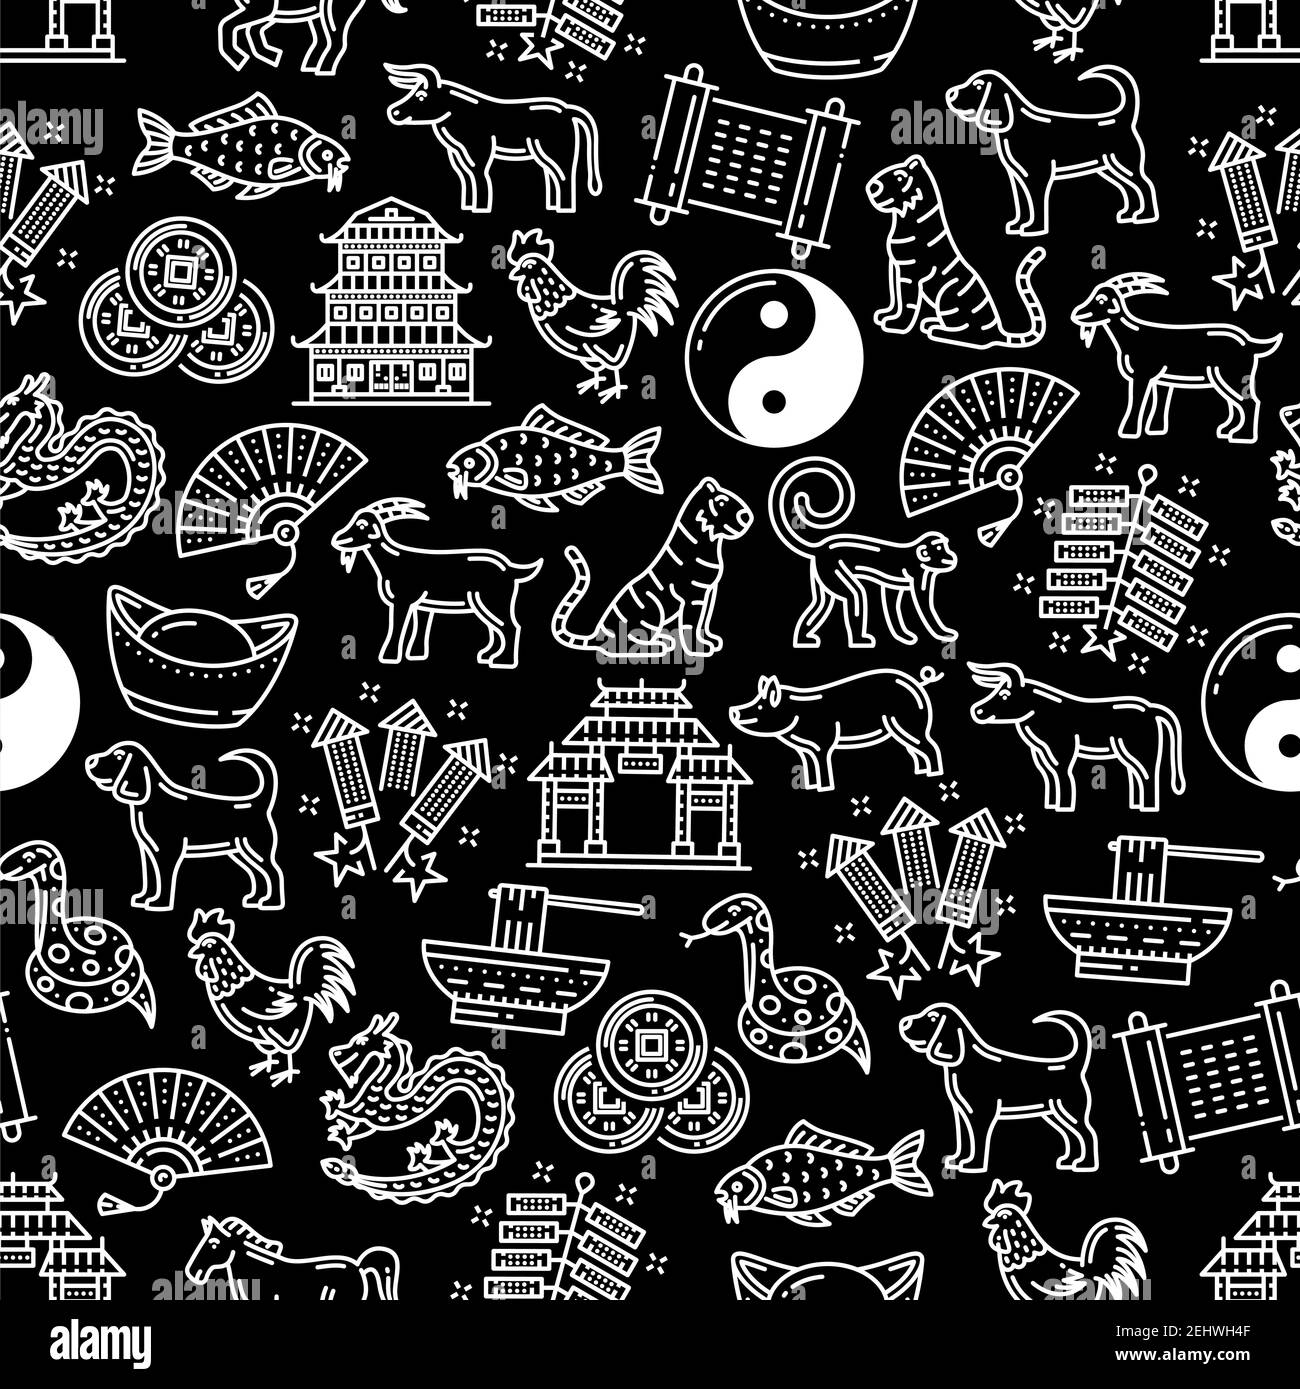 Chinese zodiac signs and celebration pattern background. Vector seamless design of traditional Chinese Lunar New Year festival decorations of dragon, Stock Vector